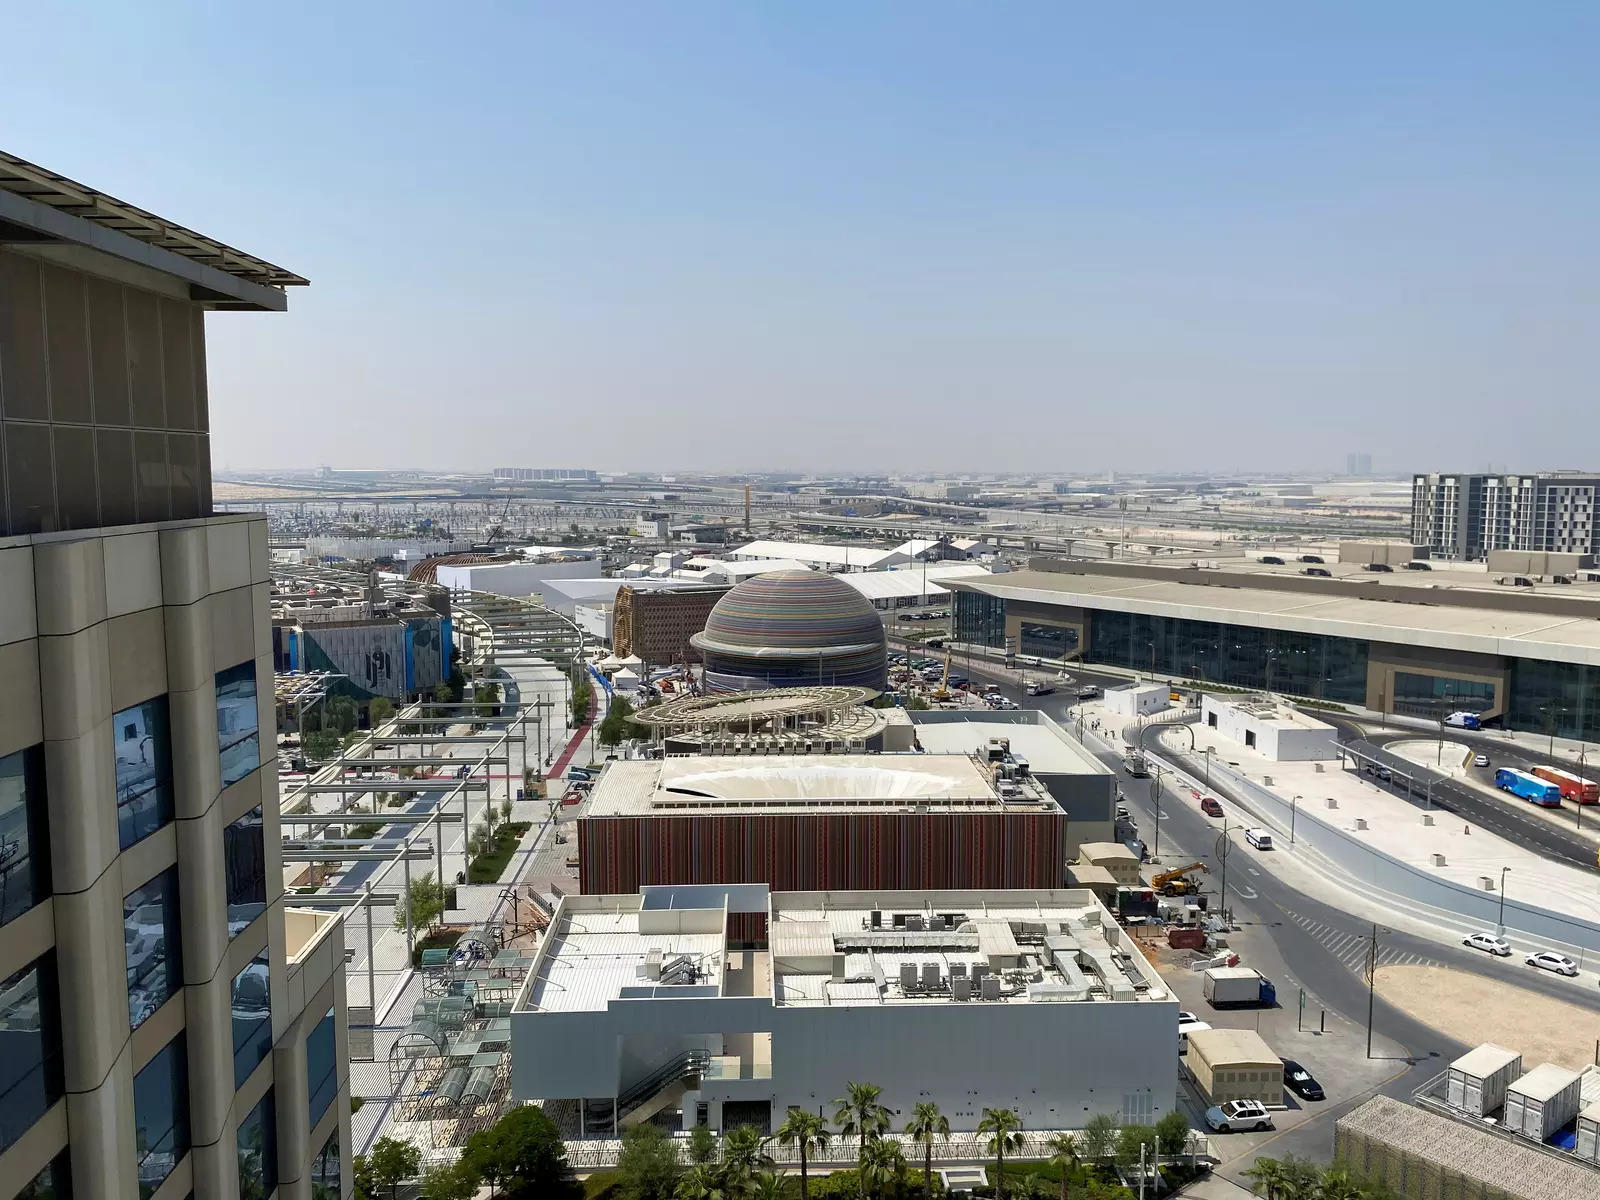 A general view shows the Expo 2020 Dubai site seen from a hotel rooftop in Dubai 